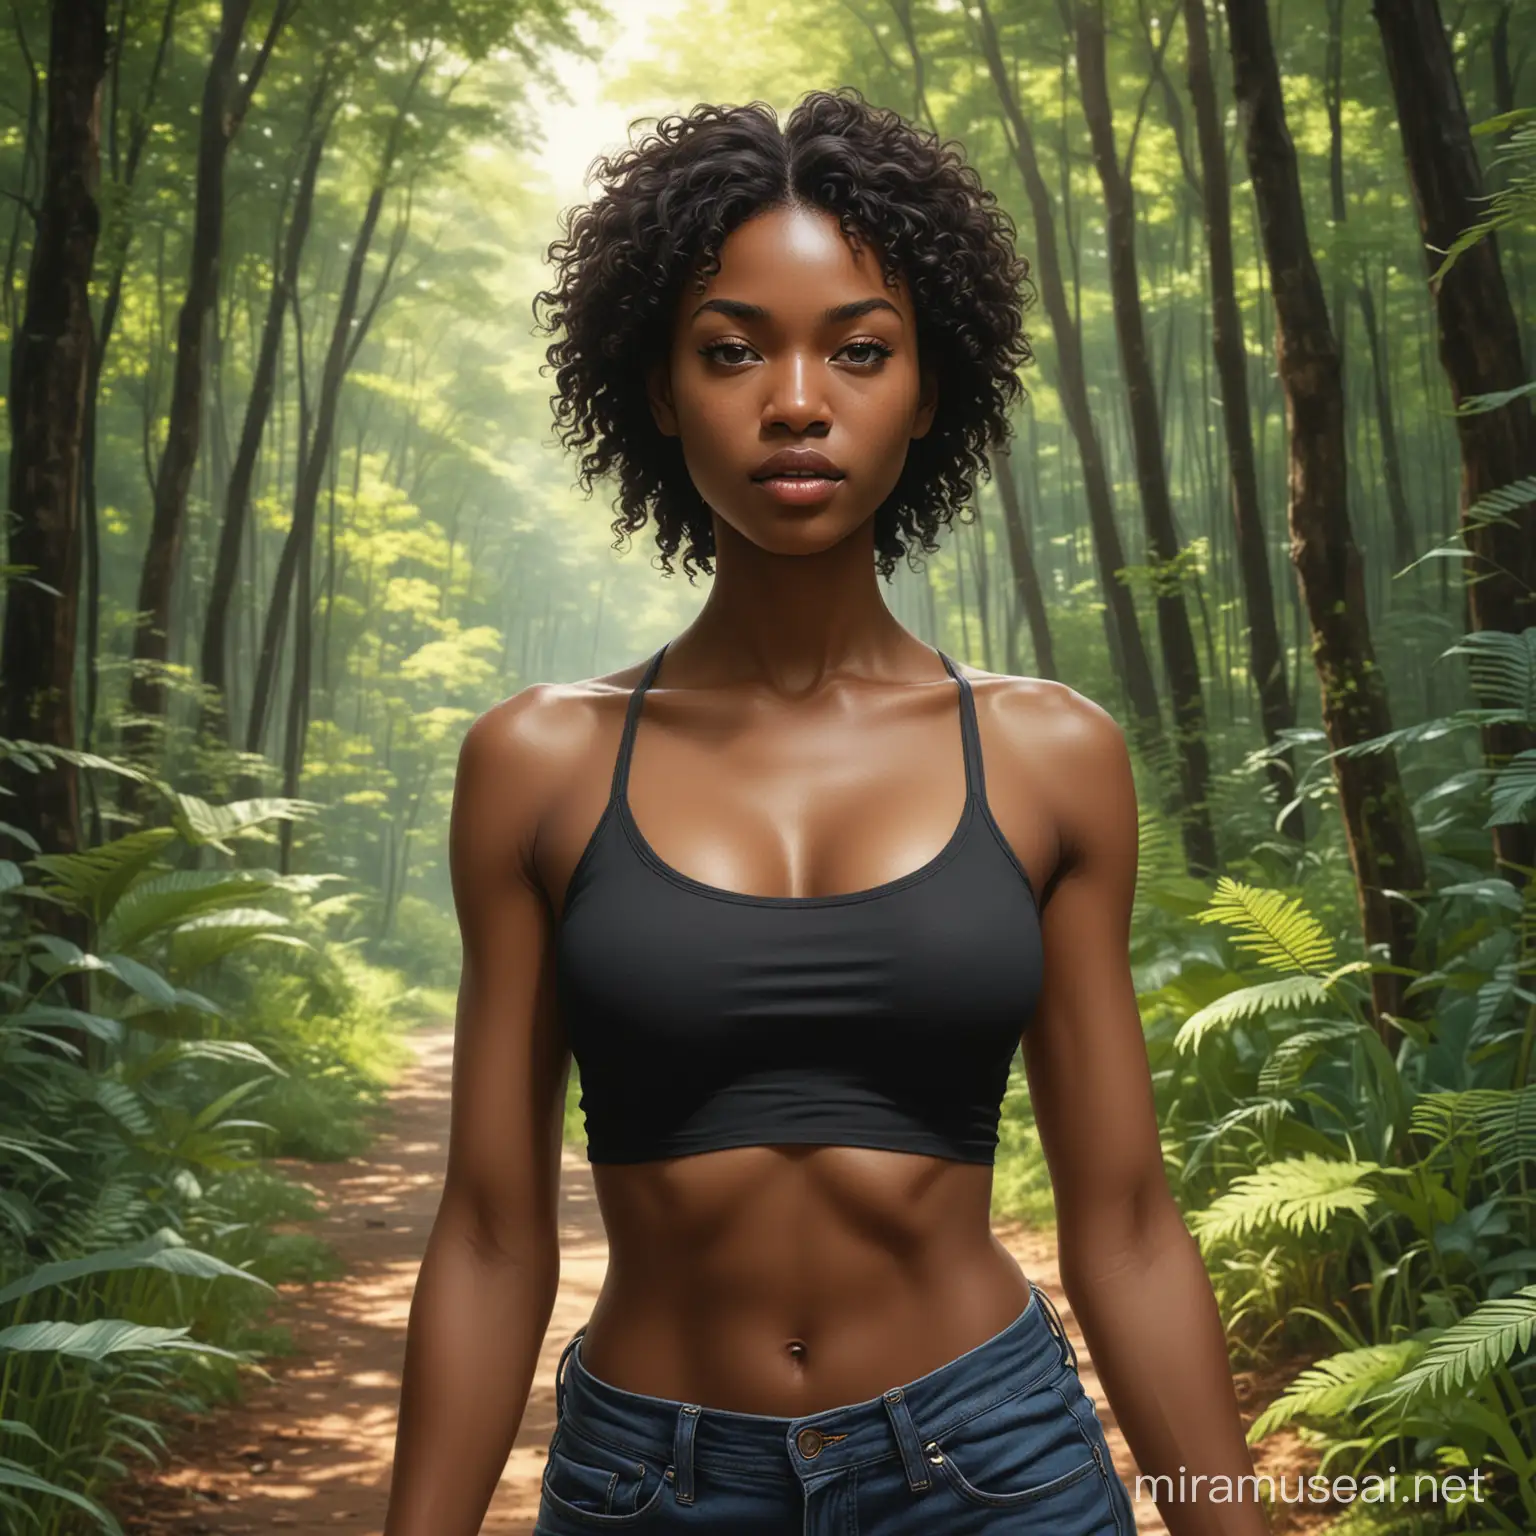 The image depicts a path winding through a lush forest setting. The scene includes various trees, plants, and grass, creating a serene natural landscape.halter top Black woman beautiful face is shown.  The woman's body parts such as chest, thigh, stomach, and abdomen are visible.painterly smooth, extremely sharp detail, finely tuned detail, 8 k, ultra sharp focus, illustration, illustration, art by Ayami Kojima Beautiful Thick Black